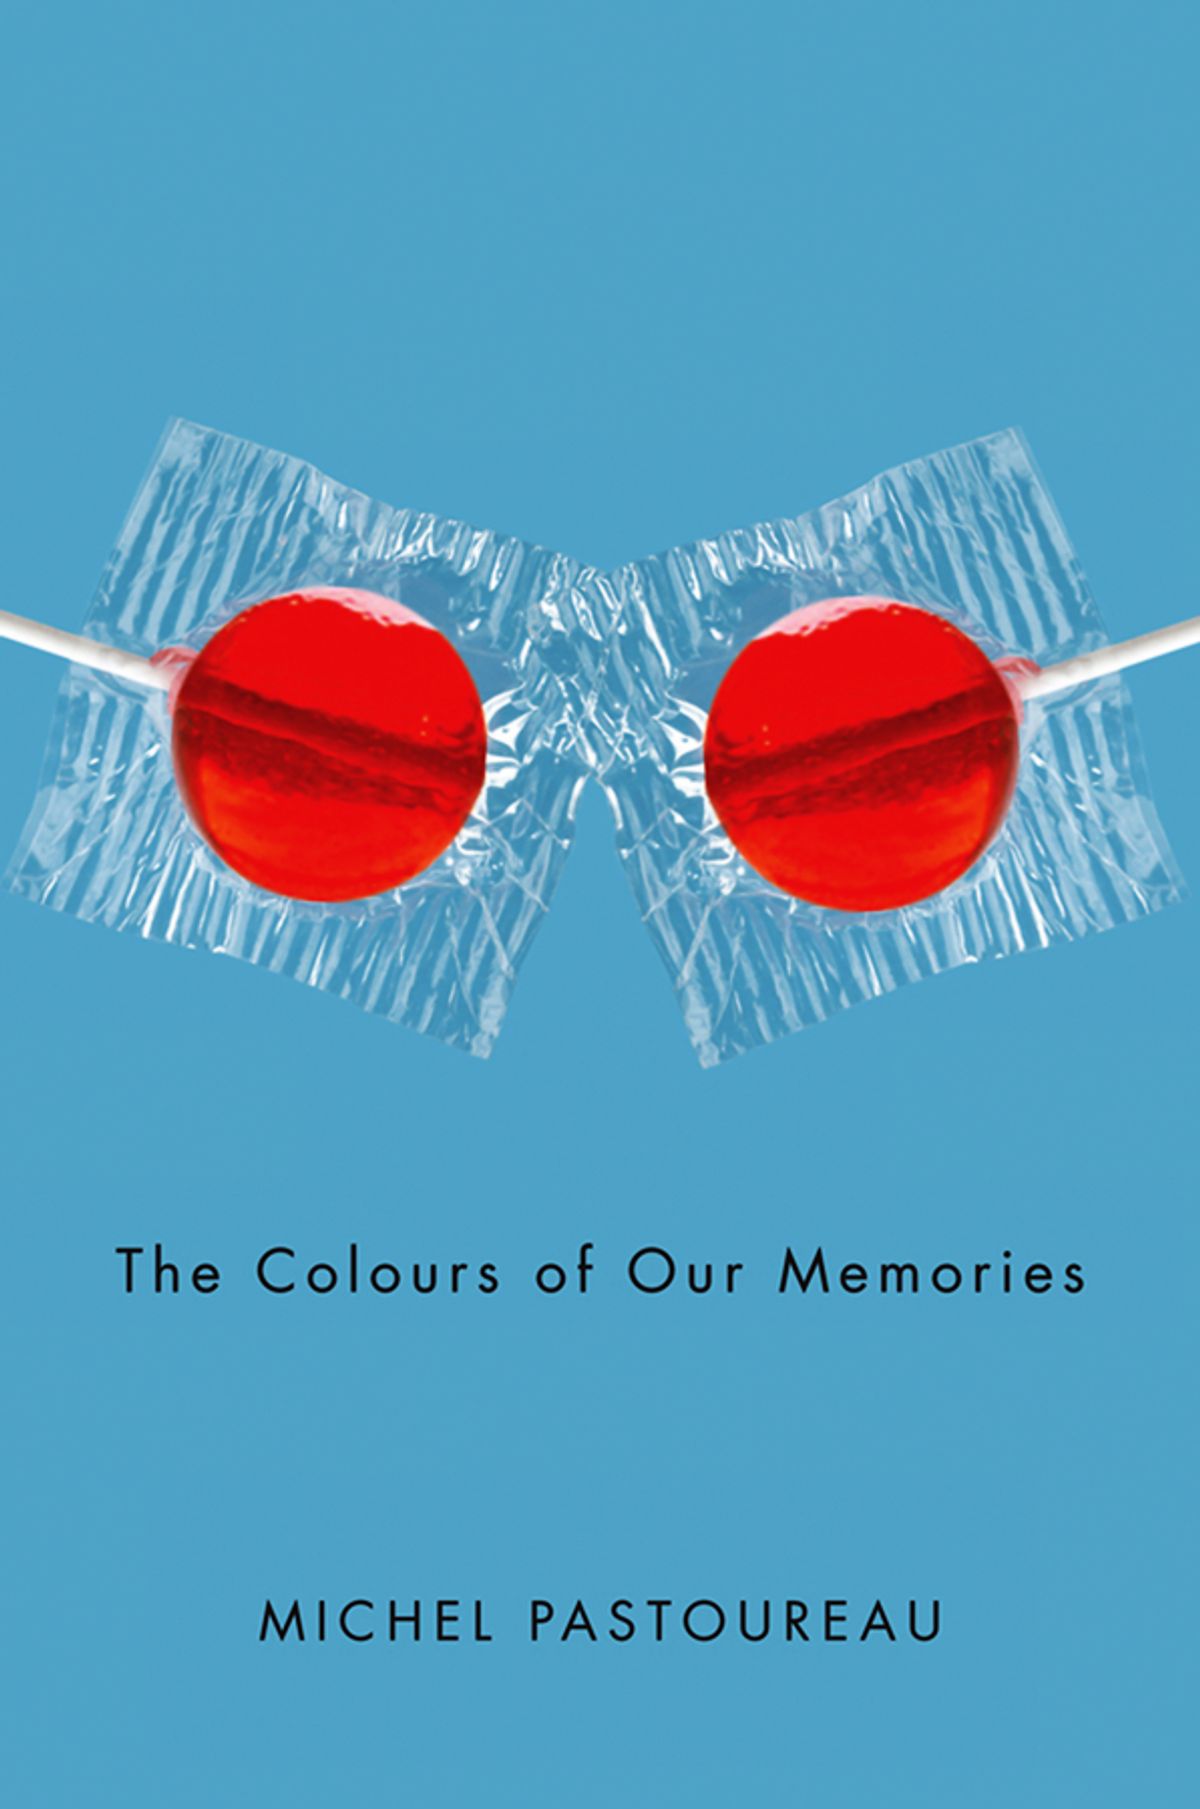 The colours of our memories